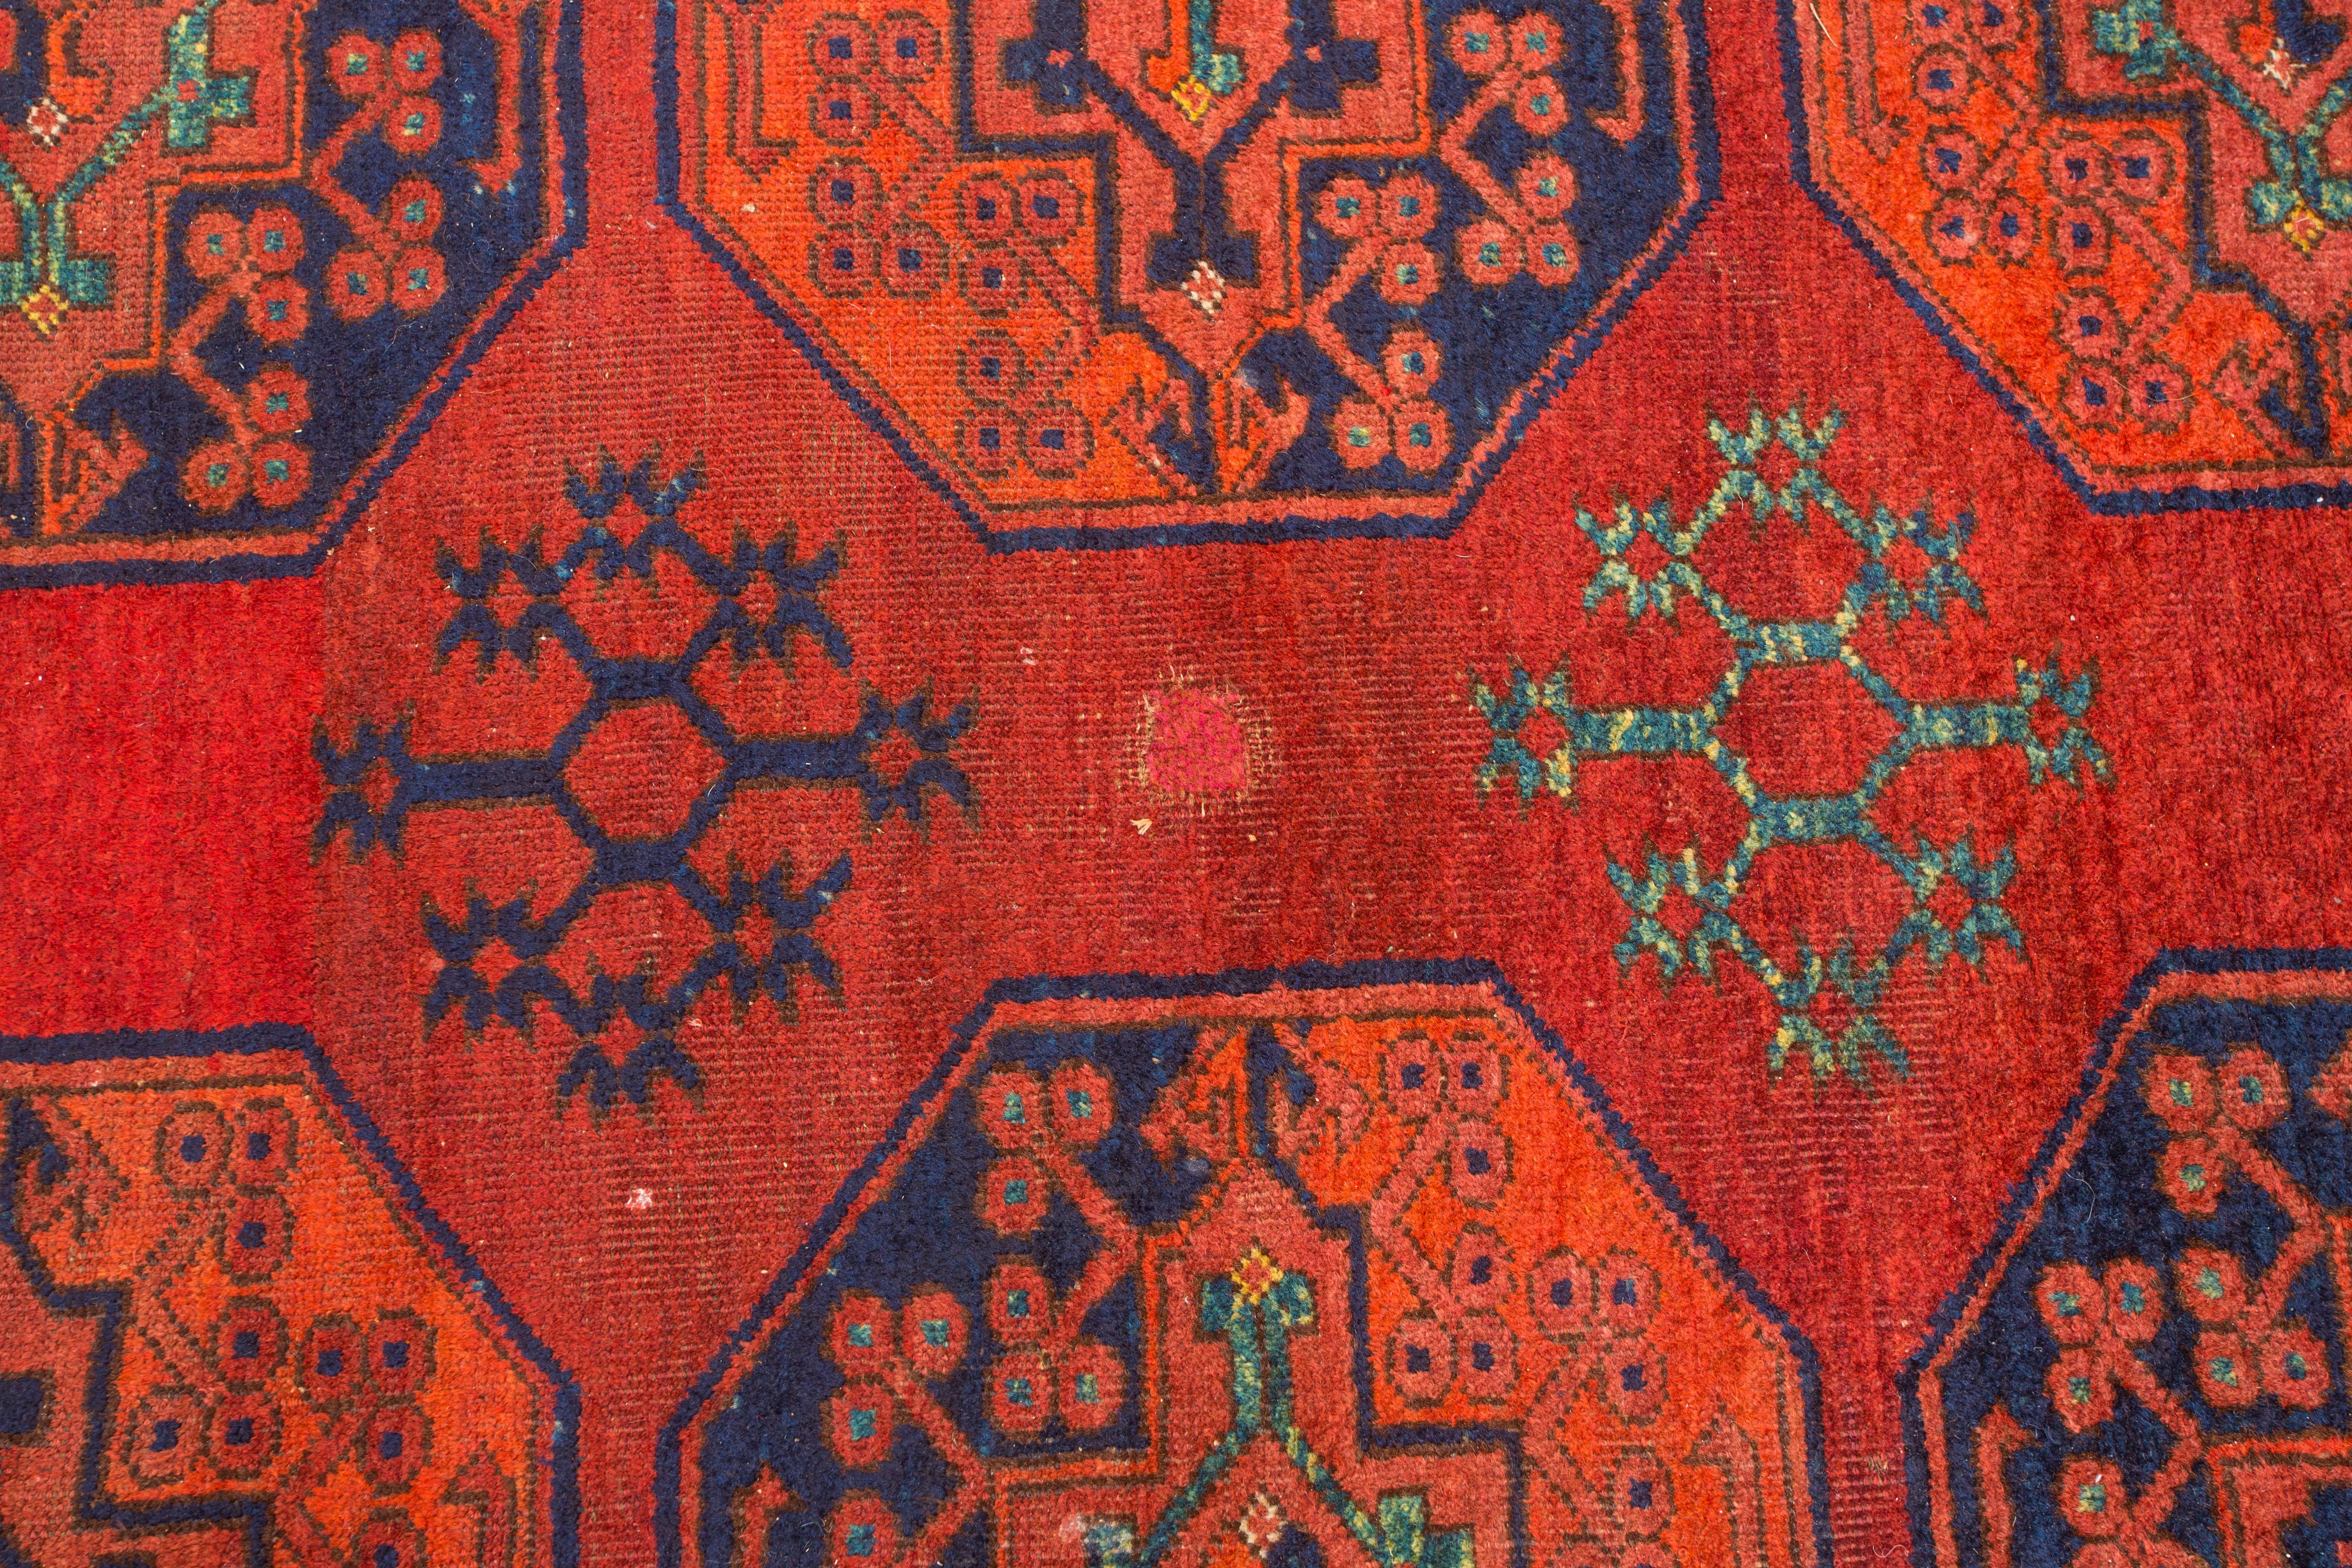 Turkomen carpets of this size and quality have been continually in demand but very difficult to acquire. Verified as to age, it appears to have been woven for a chieftan or tribal leader as it would require a large yurt to accommodate it , and its